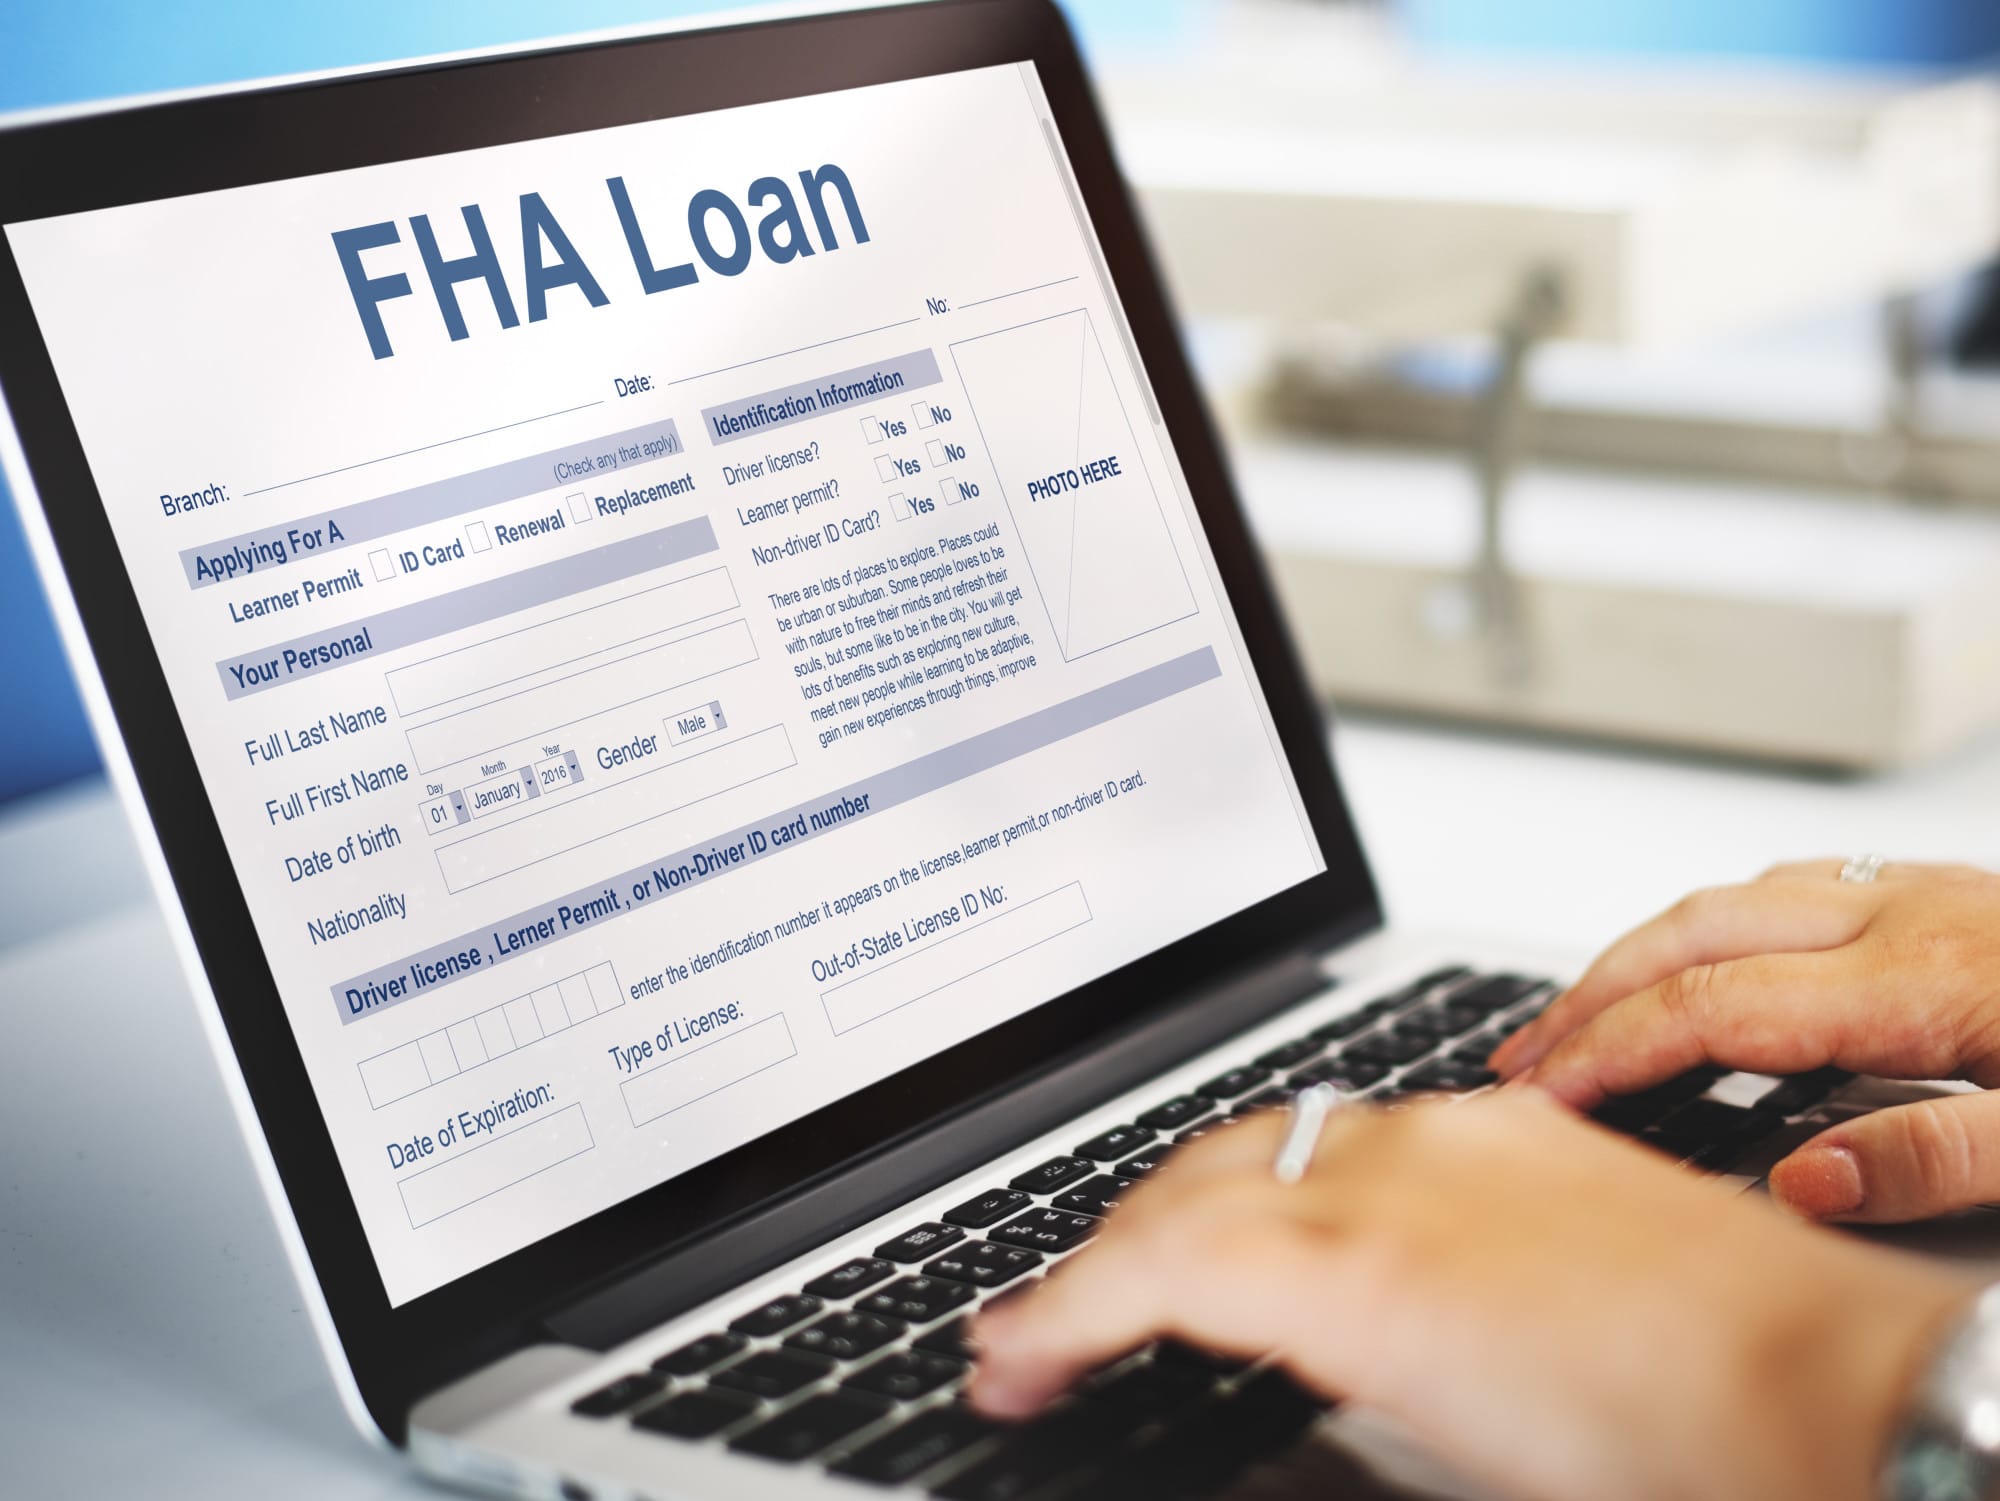 5 Noteworthy Insights About Your FHA Loan Application